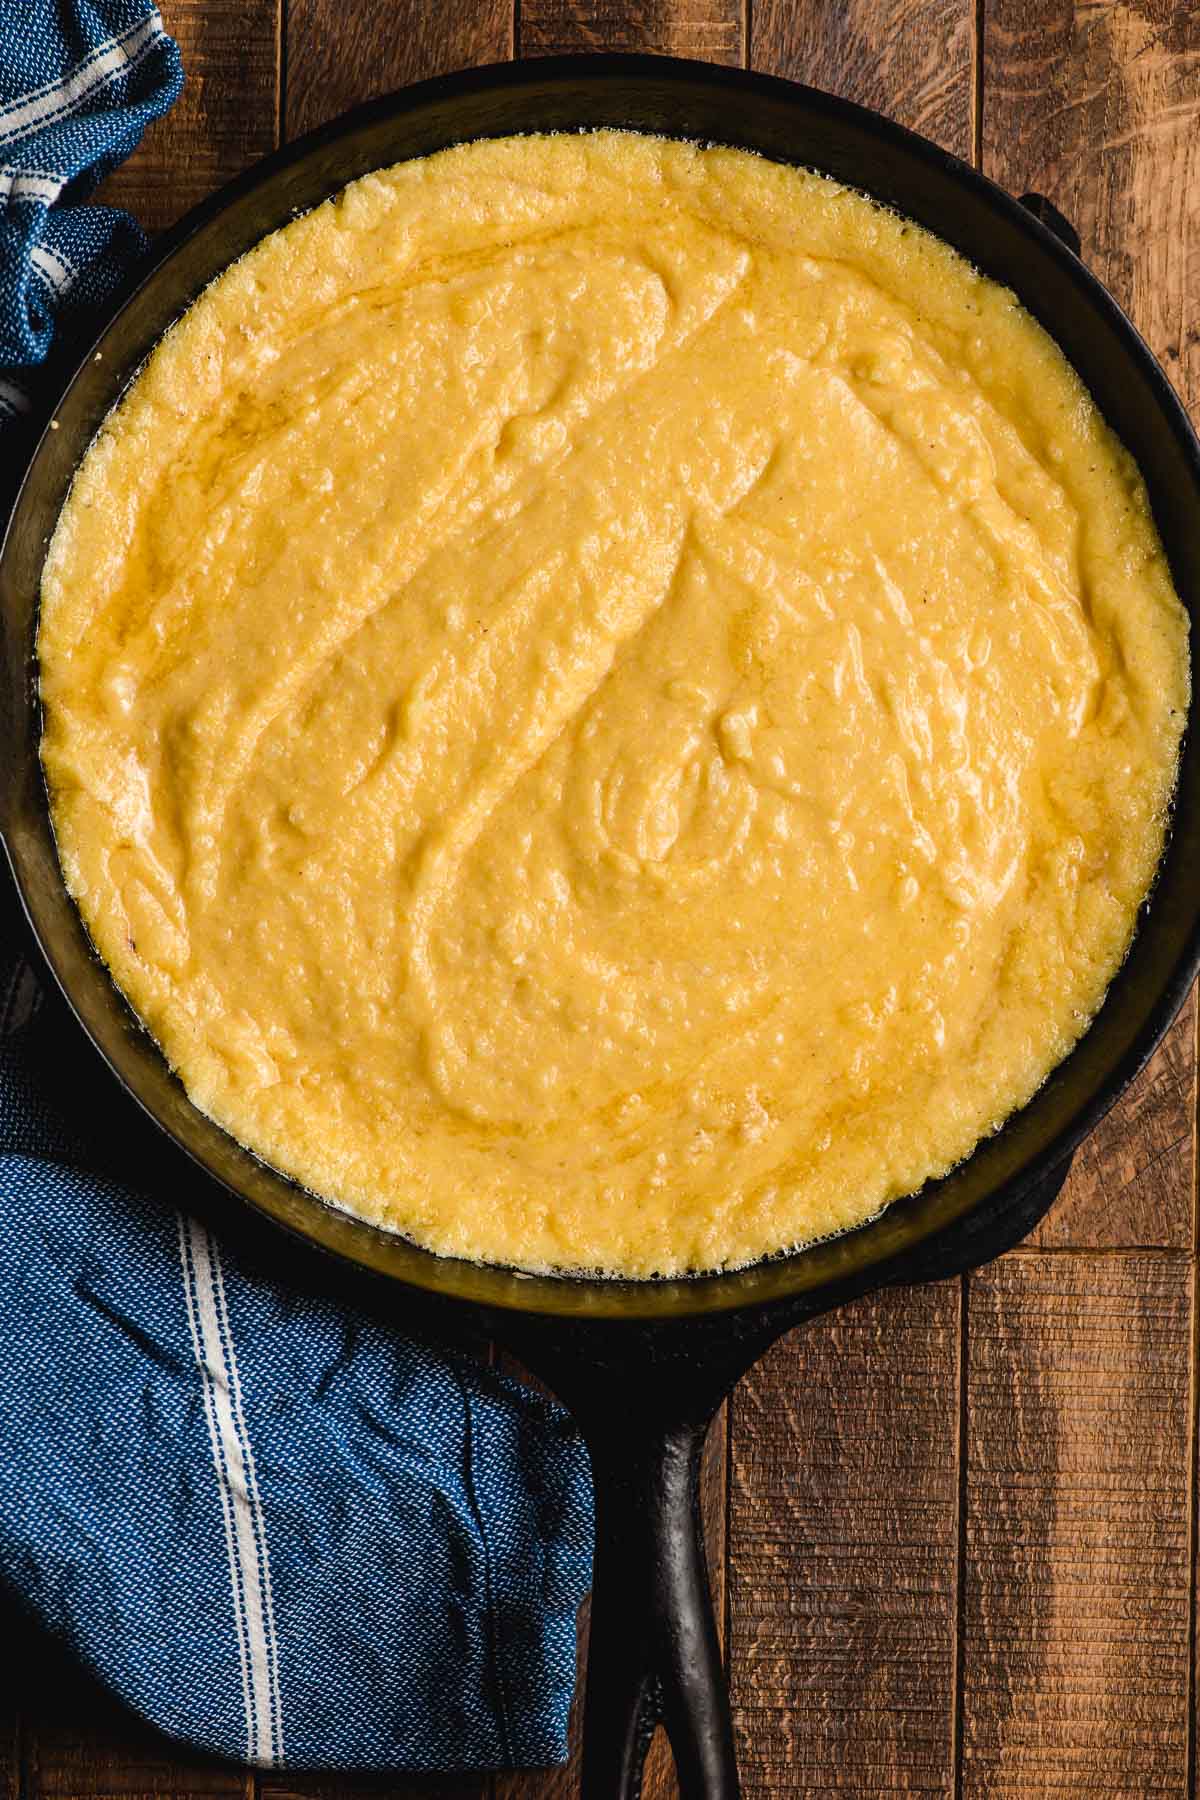 Cast iron skillet with cornbread batter in it, ready to go in the oven.